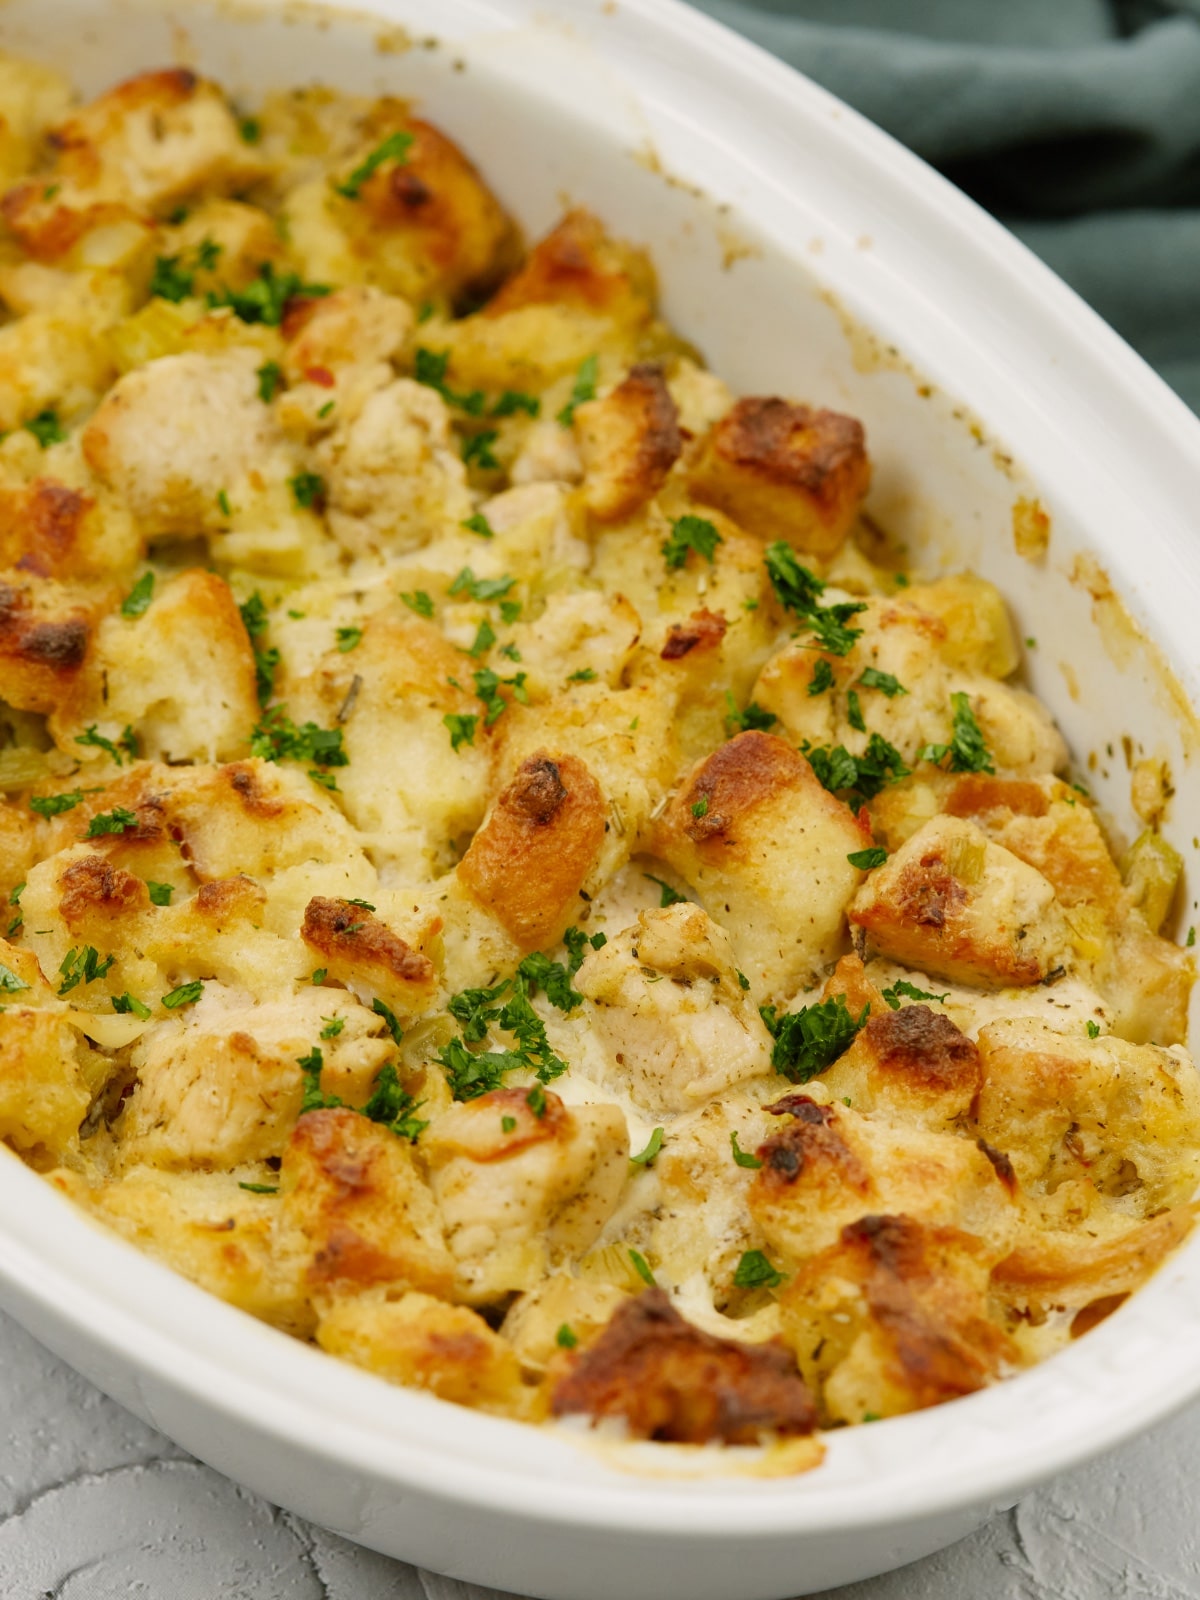 baked chicken stuffing casserole in a white baking dish on a white surface